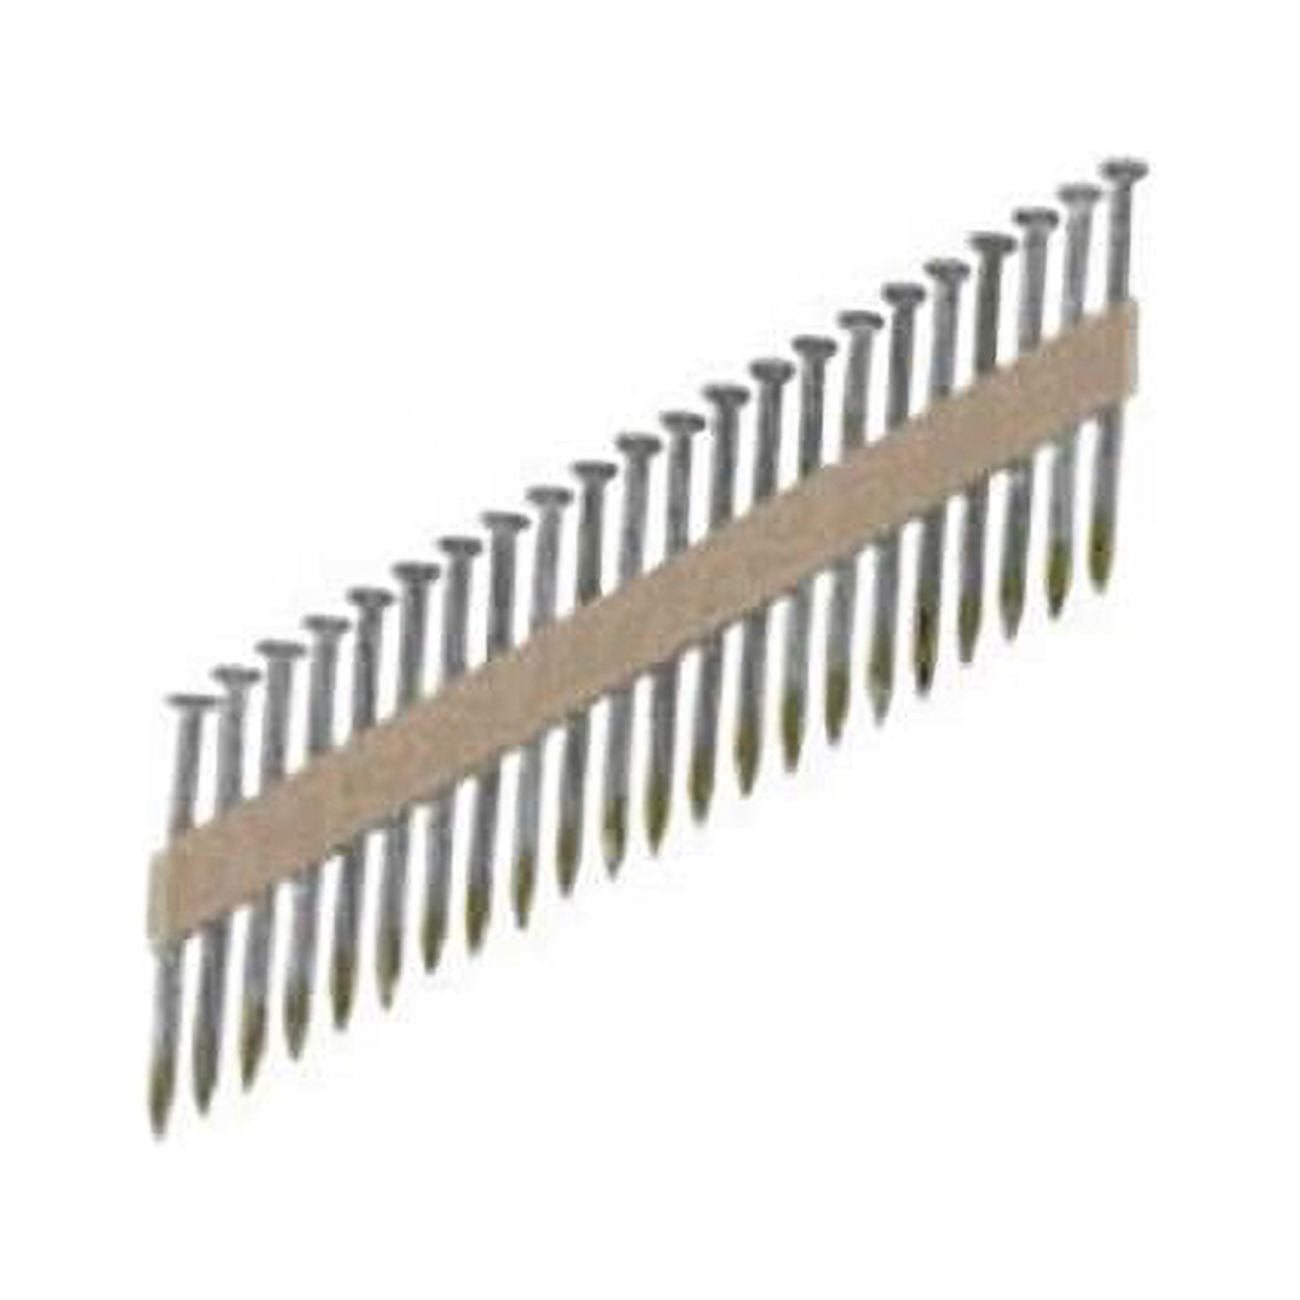 2597276 10 Gauge Smooth Shank Metal Connector Nails With Angled Strip, 2.5 In. X 0.162 In. Dia. - Pack Of 2000